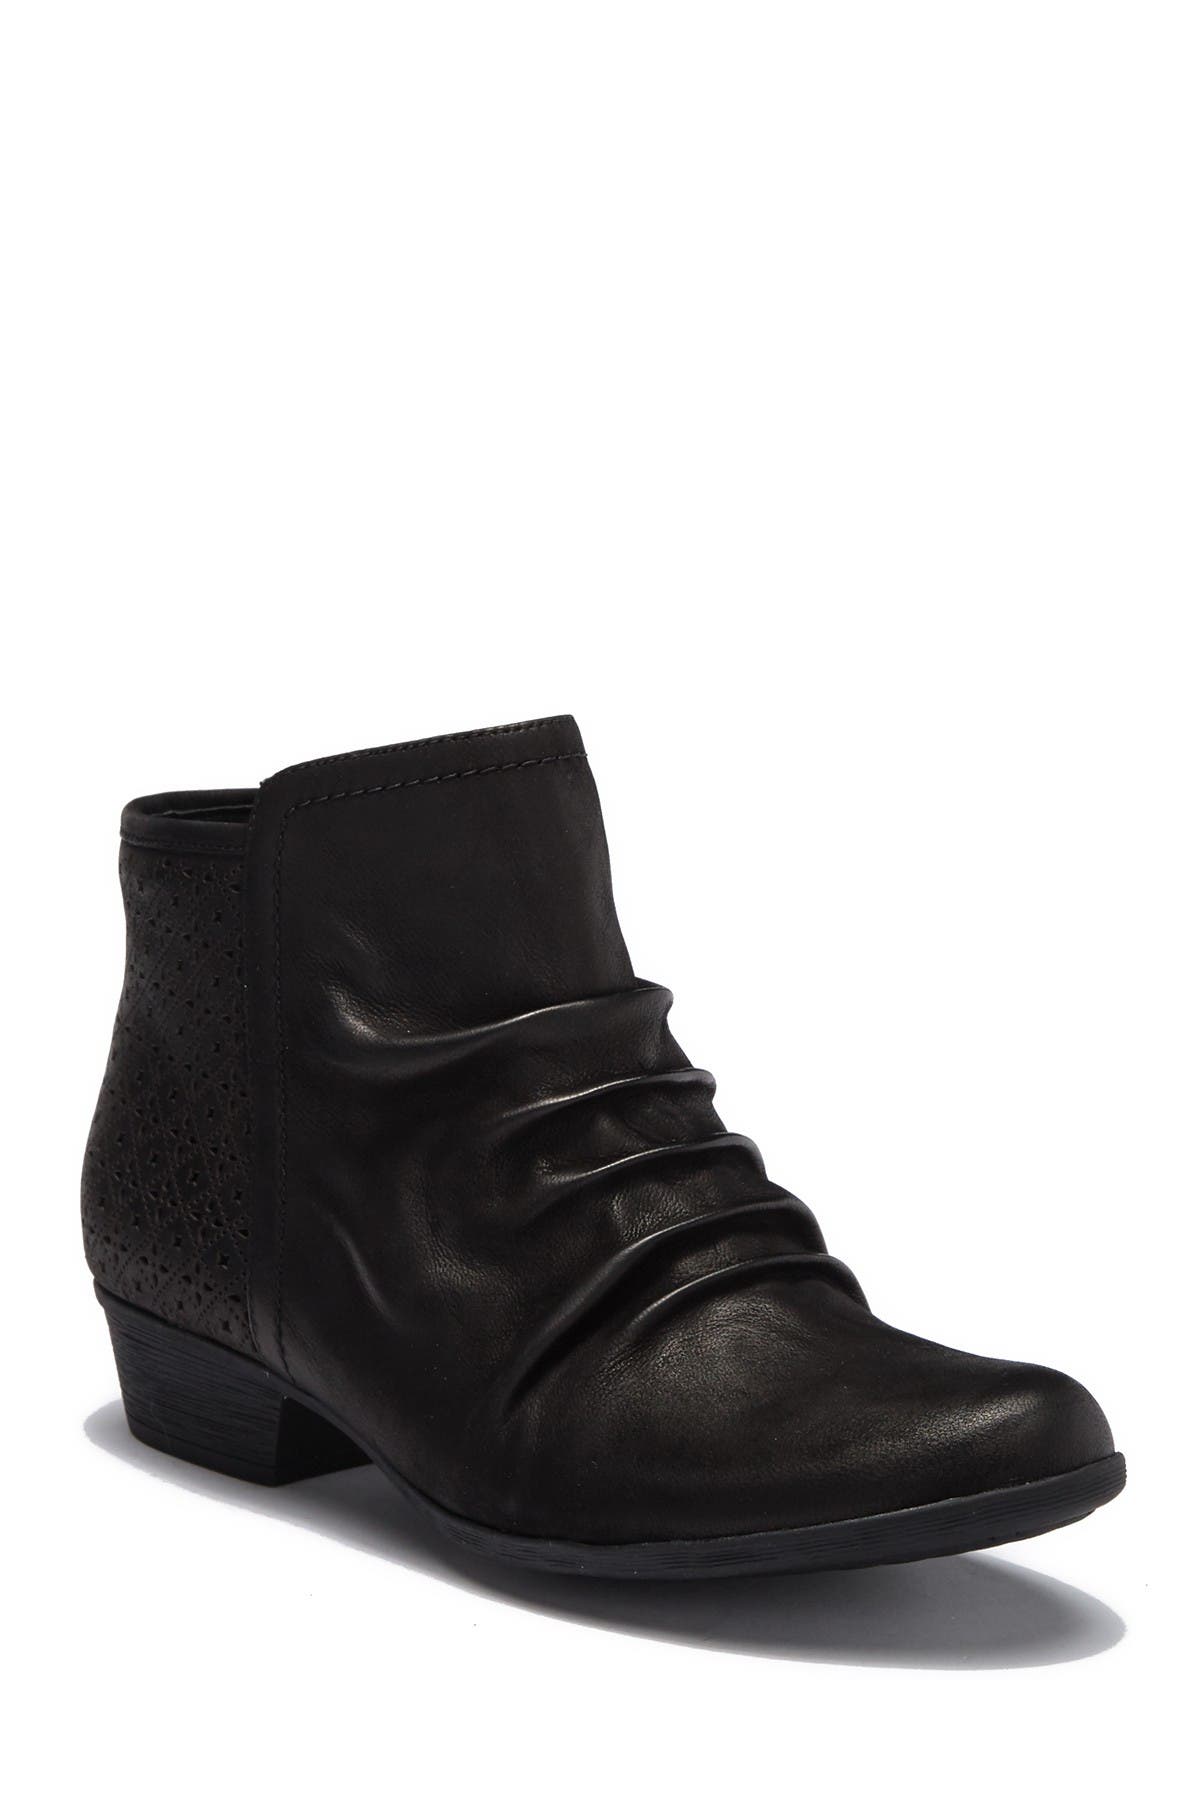 rockport women's carly bootie ankle boot